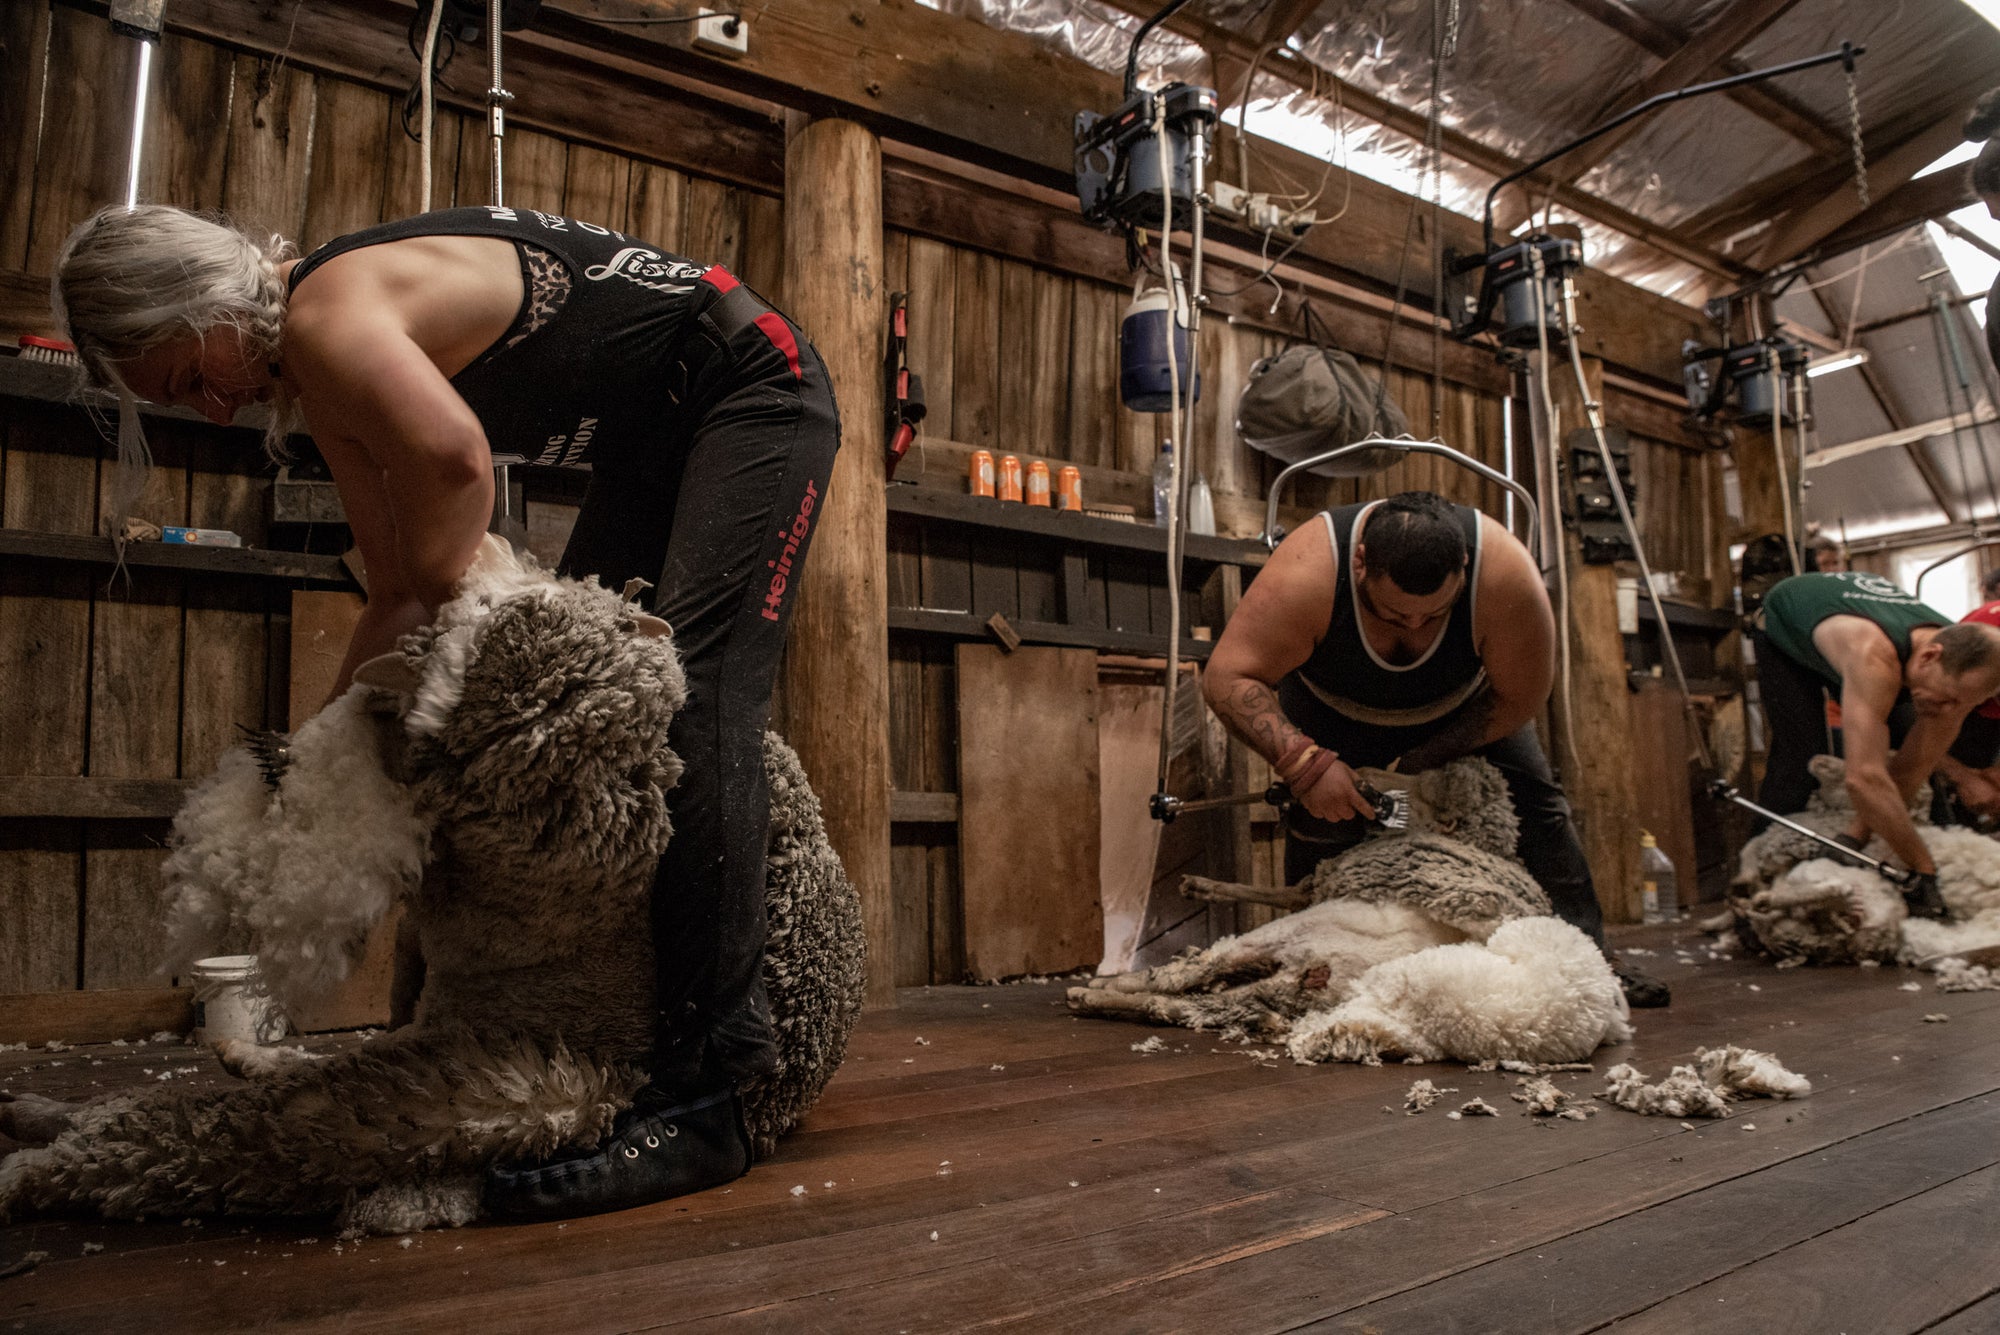 Three persons in a shed, shearing a Merino sheep at the Congi station